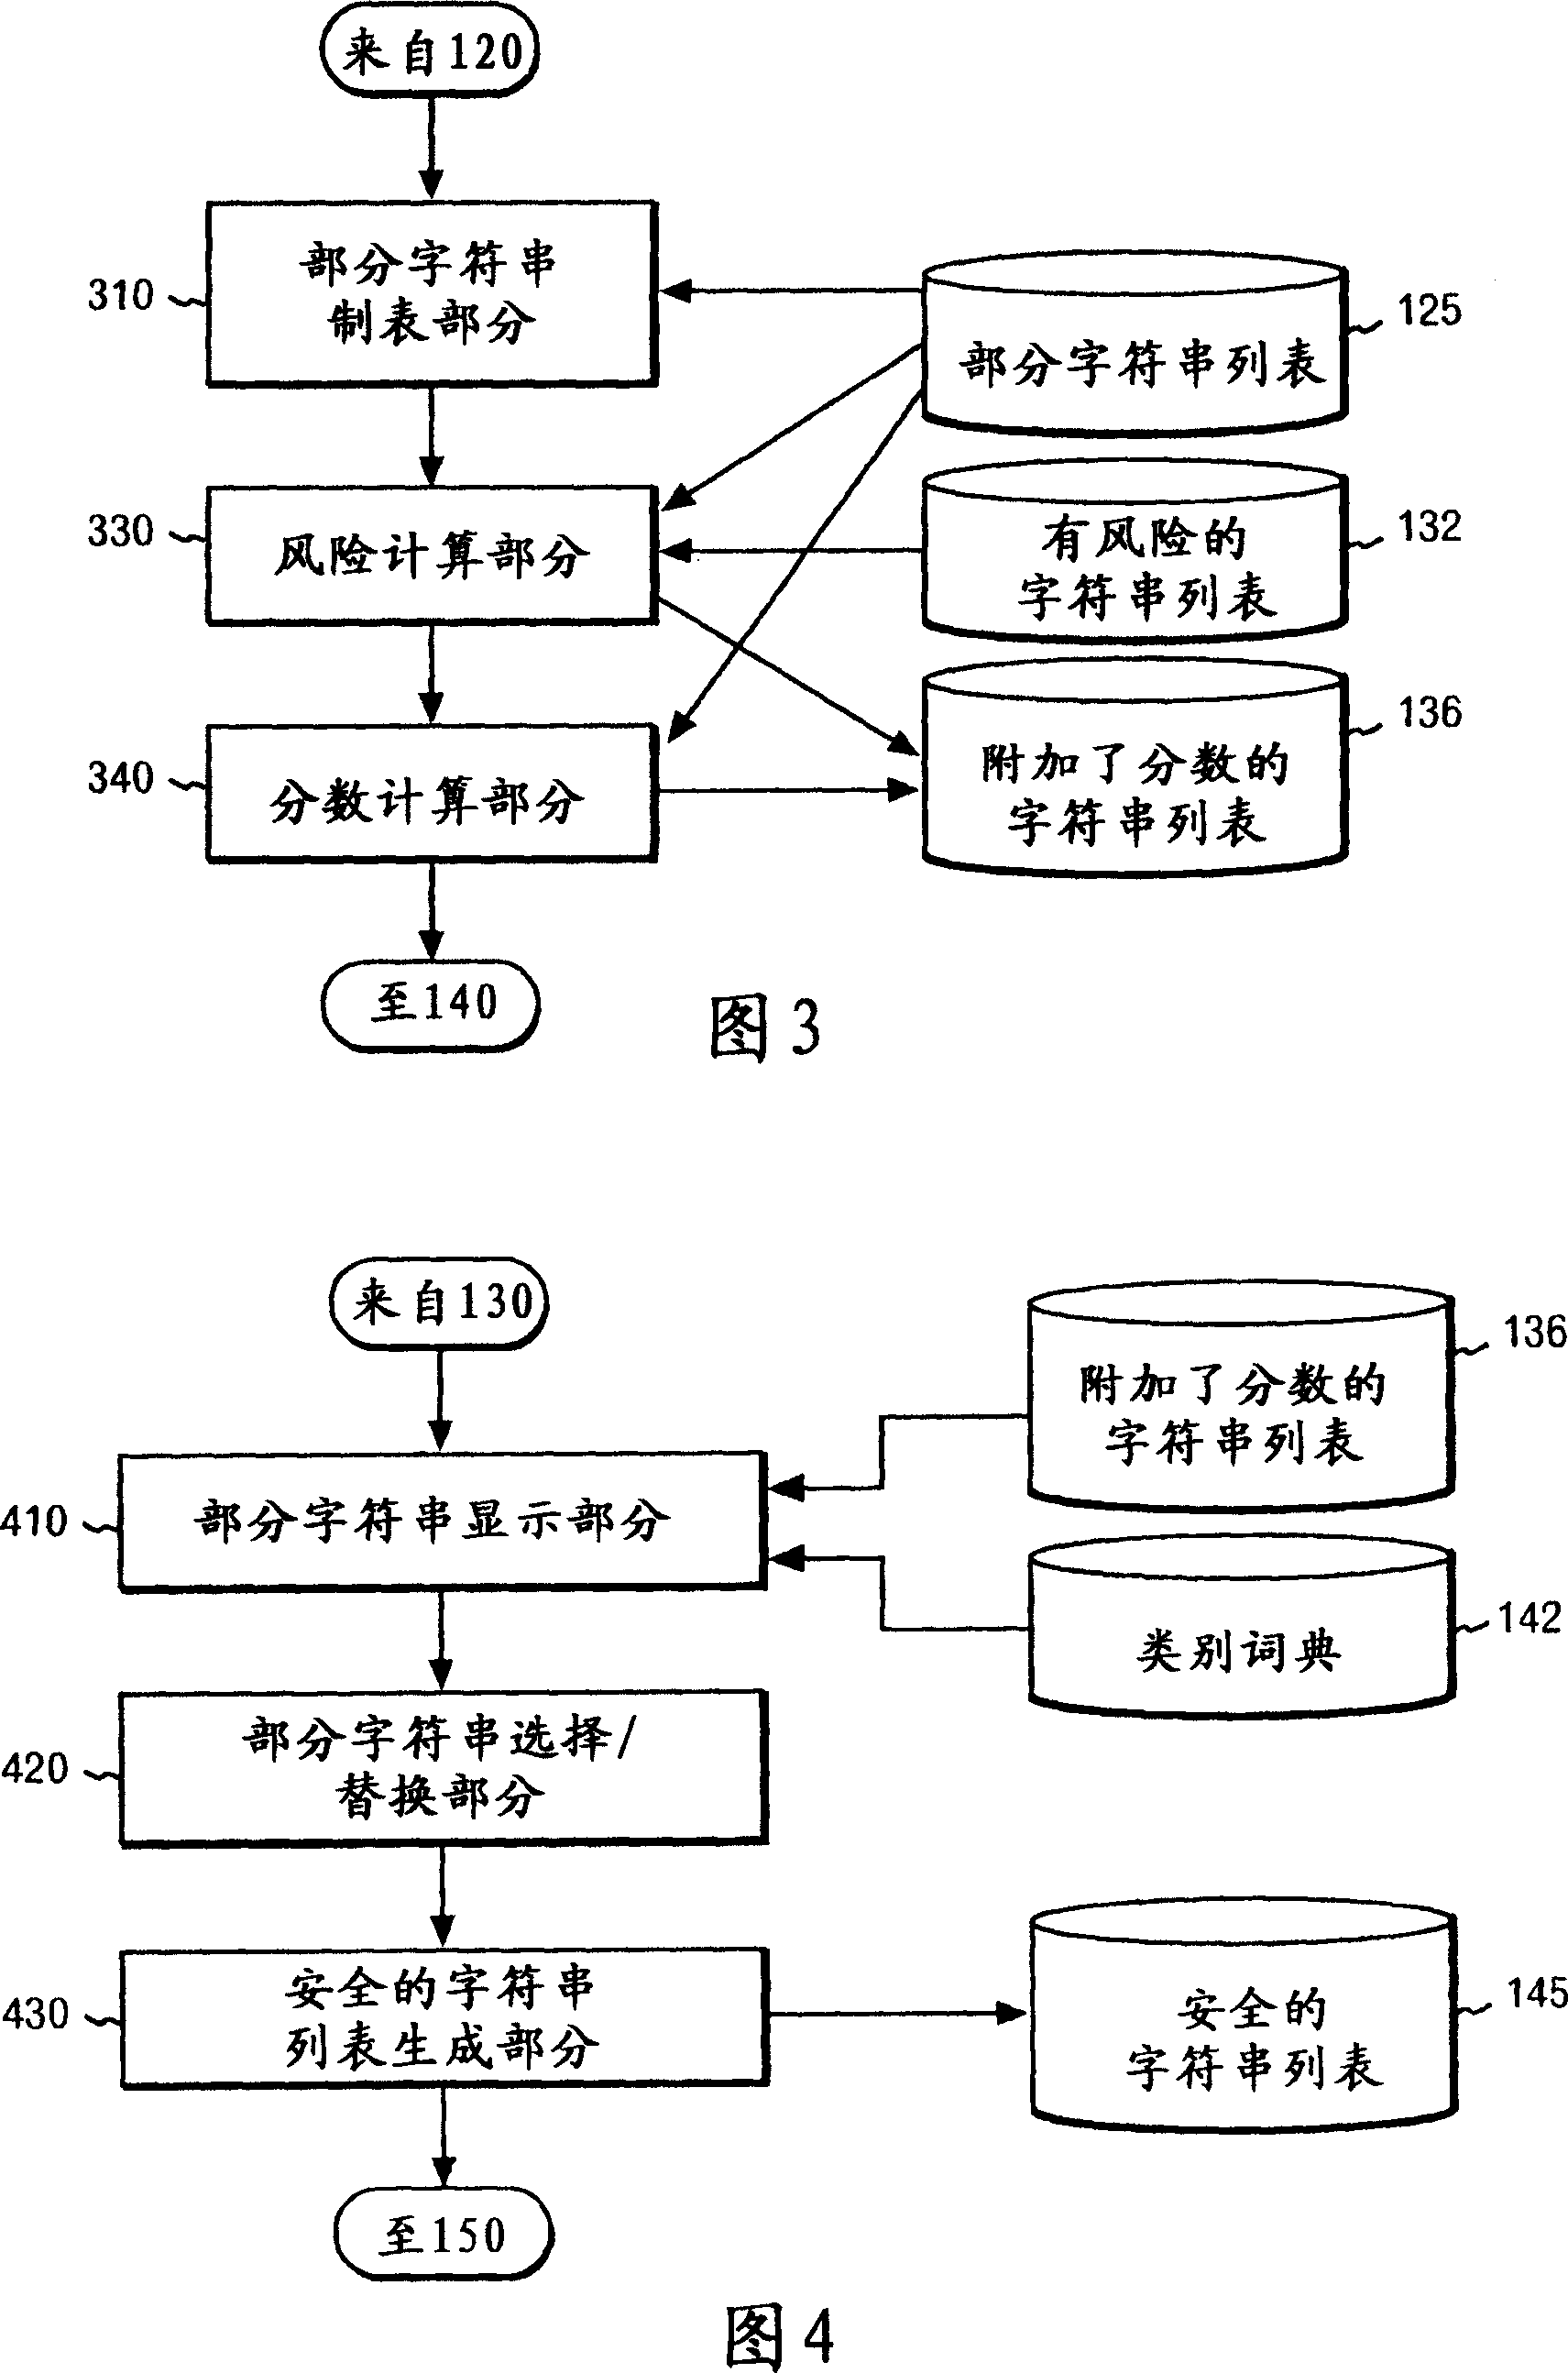 Character string processing method and apparatus